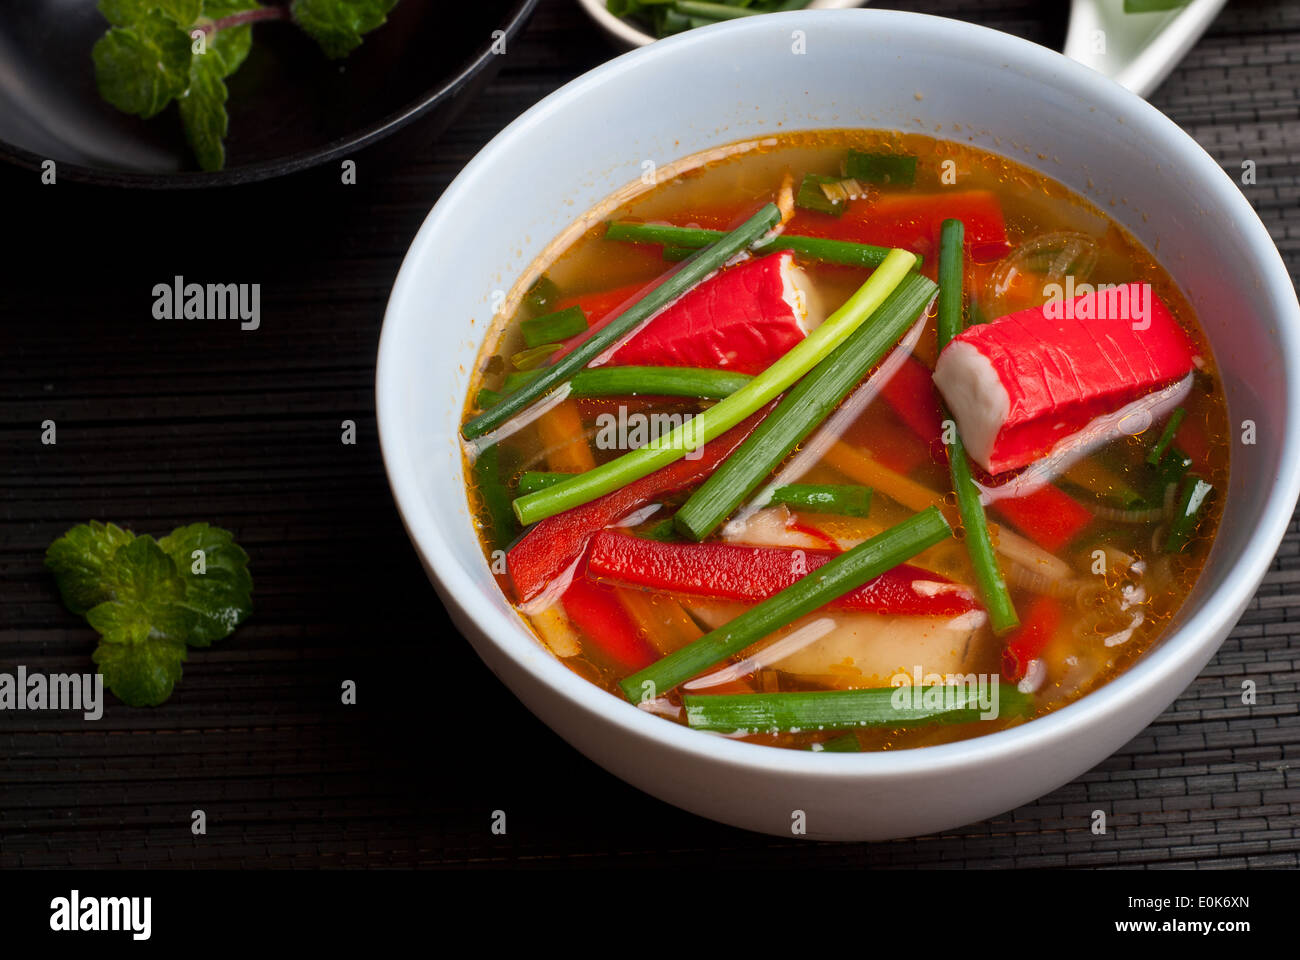 East style surimi (kanikama) soup with rice noodles and chives Stock Photo